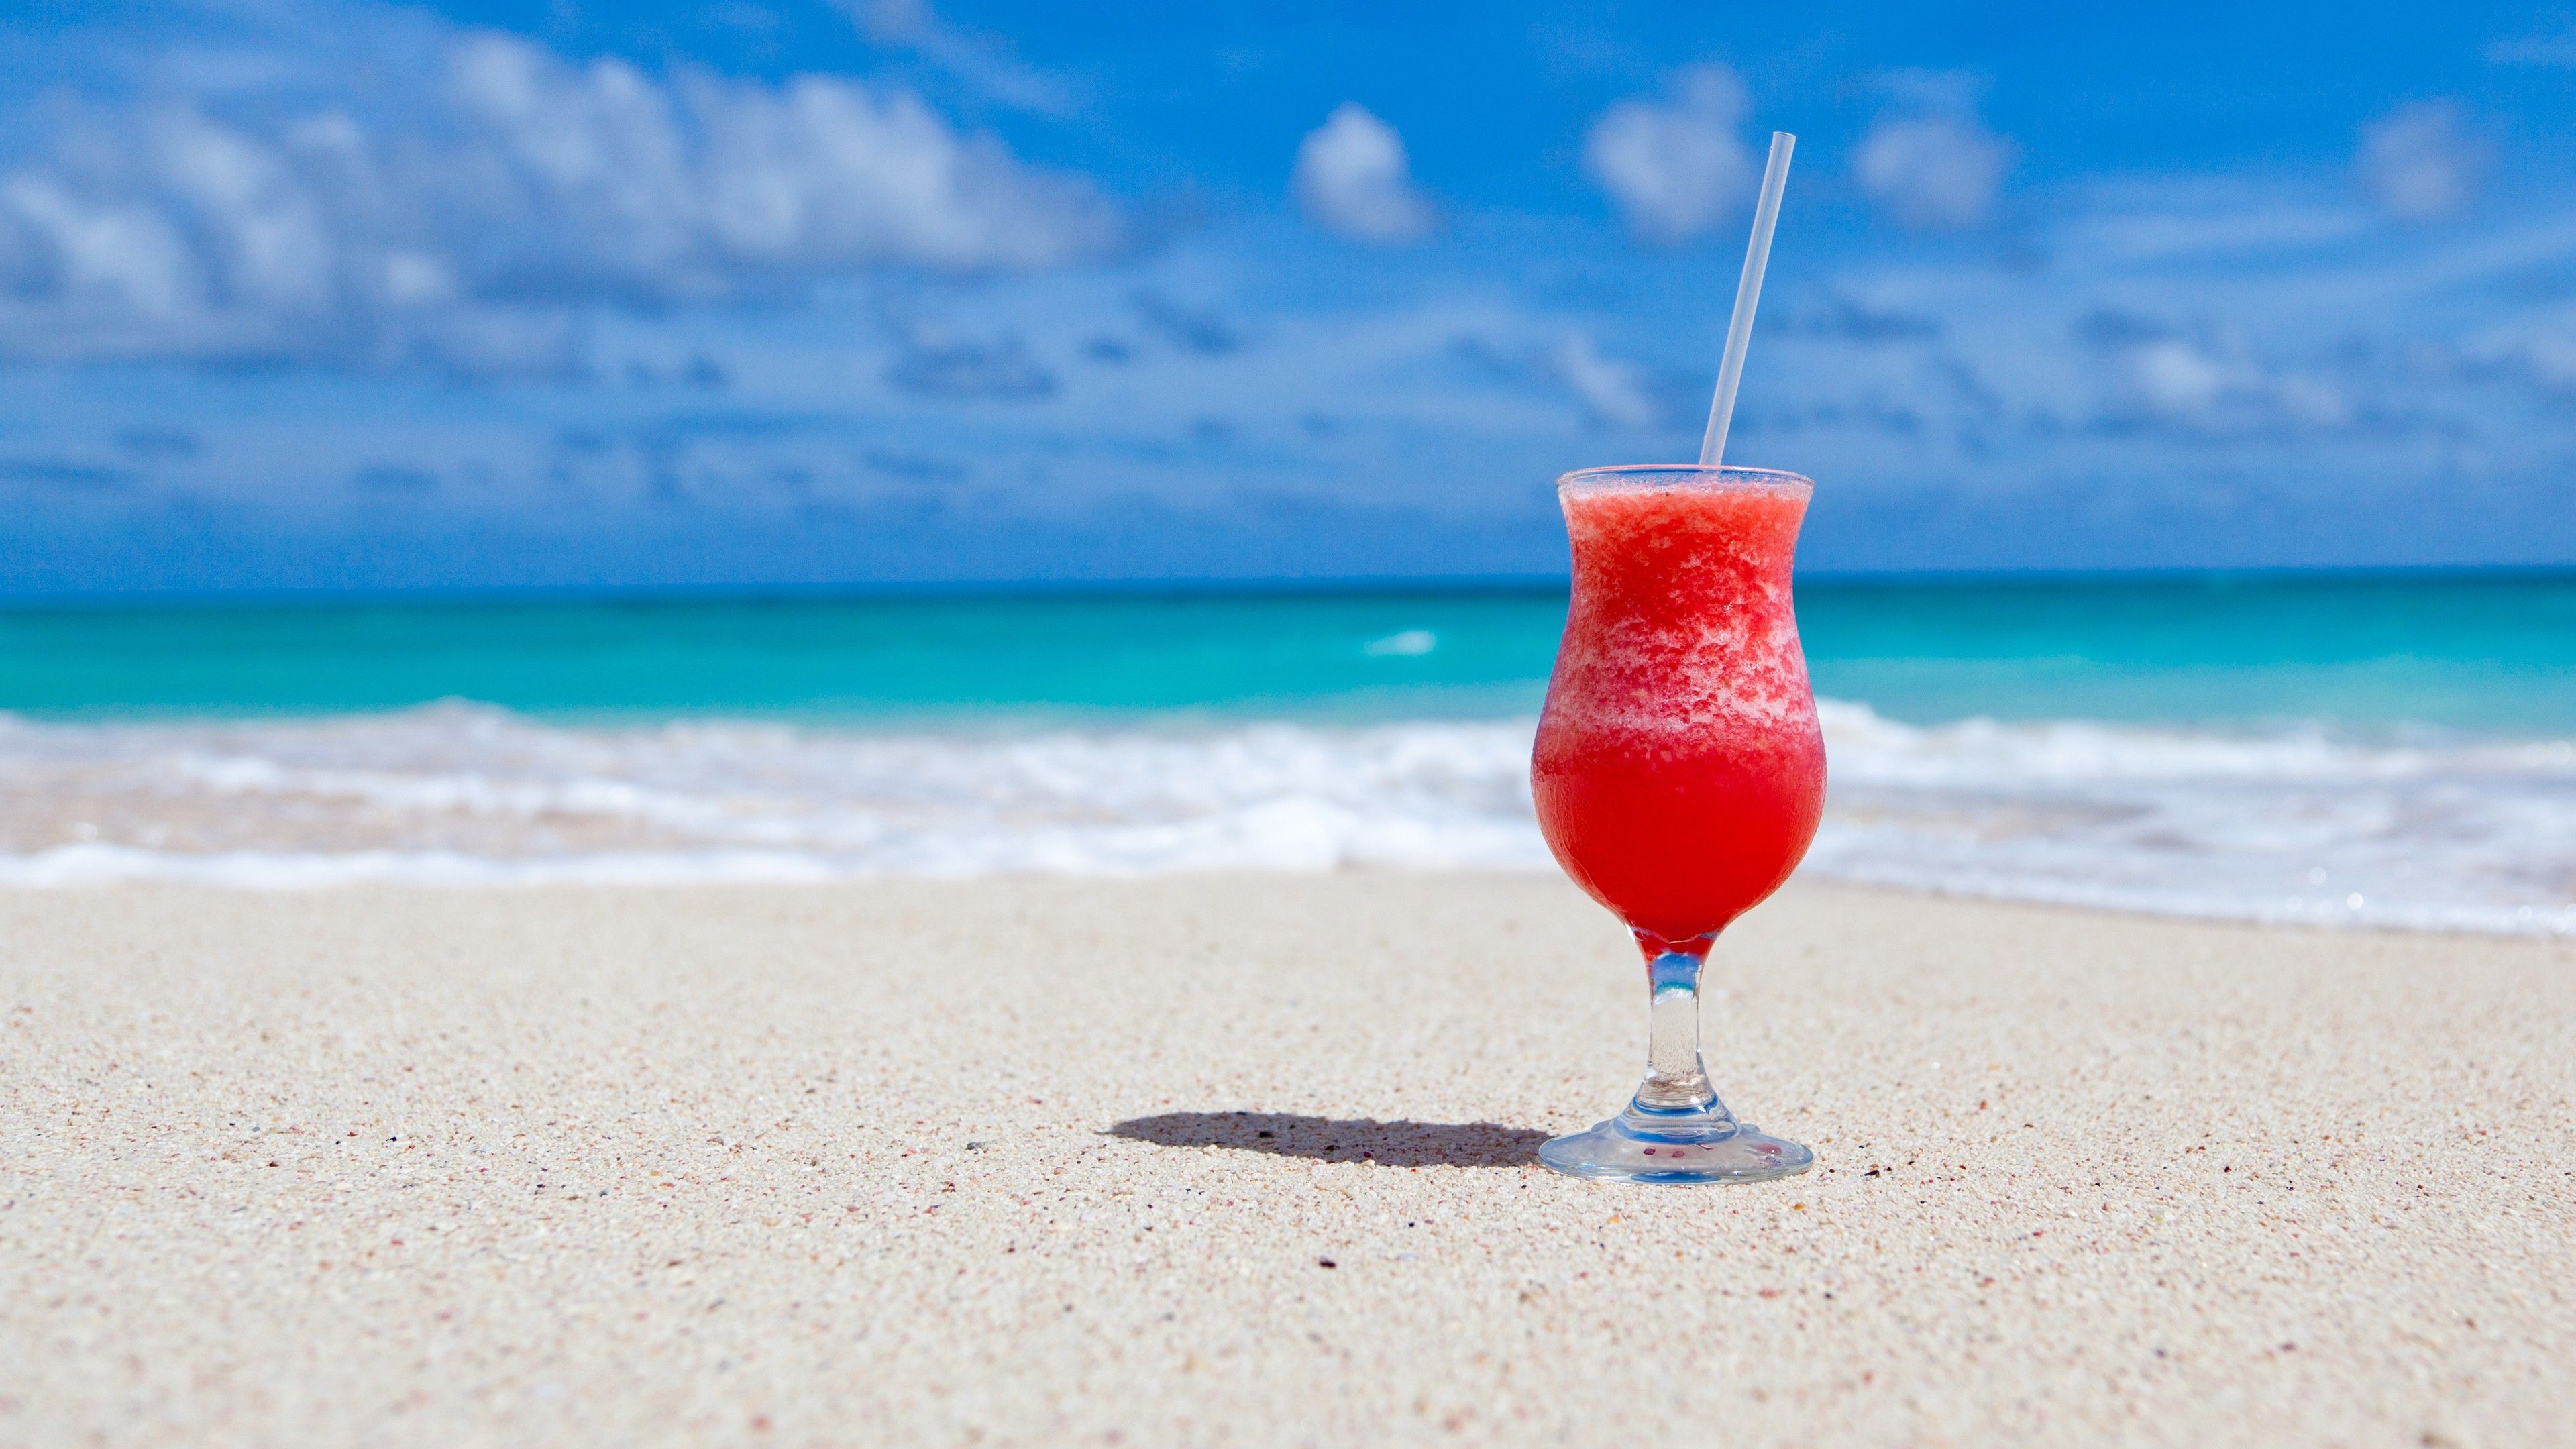 Wallpaper, water, sand, sky, drink, tropical, summer, cocktails, vacation, 3840x2160 px, non alcoholic beverage, sea breeze, blue lagoon, sex on the beach 3840x2160